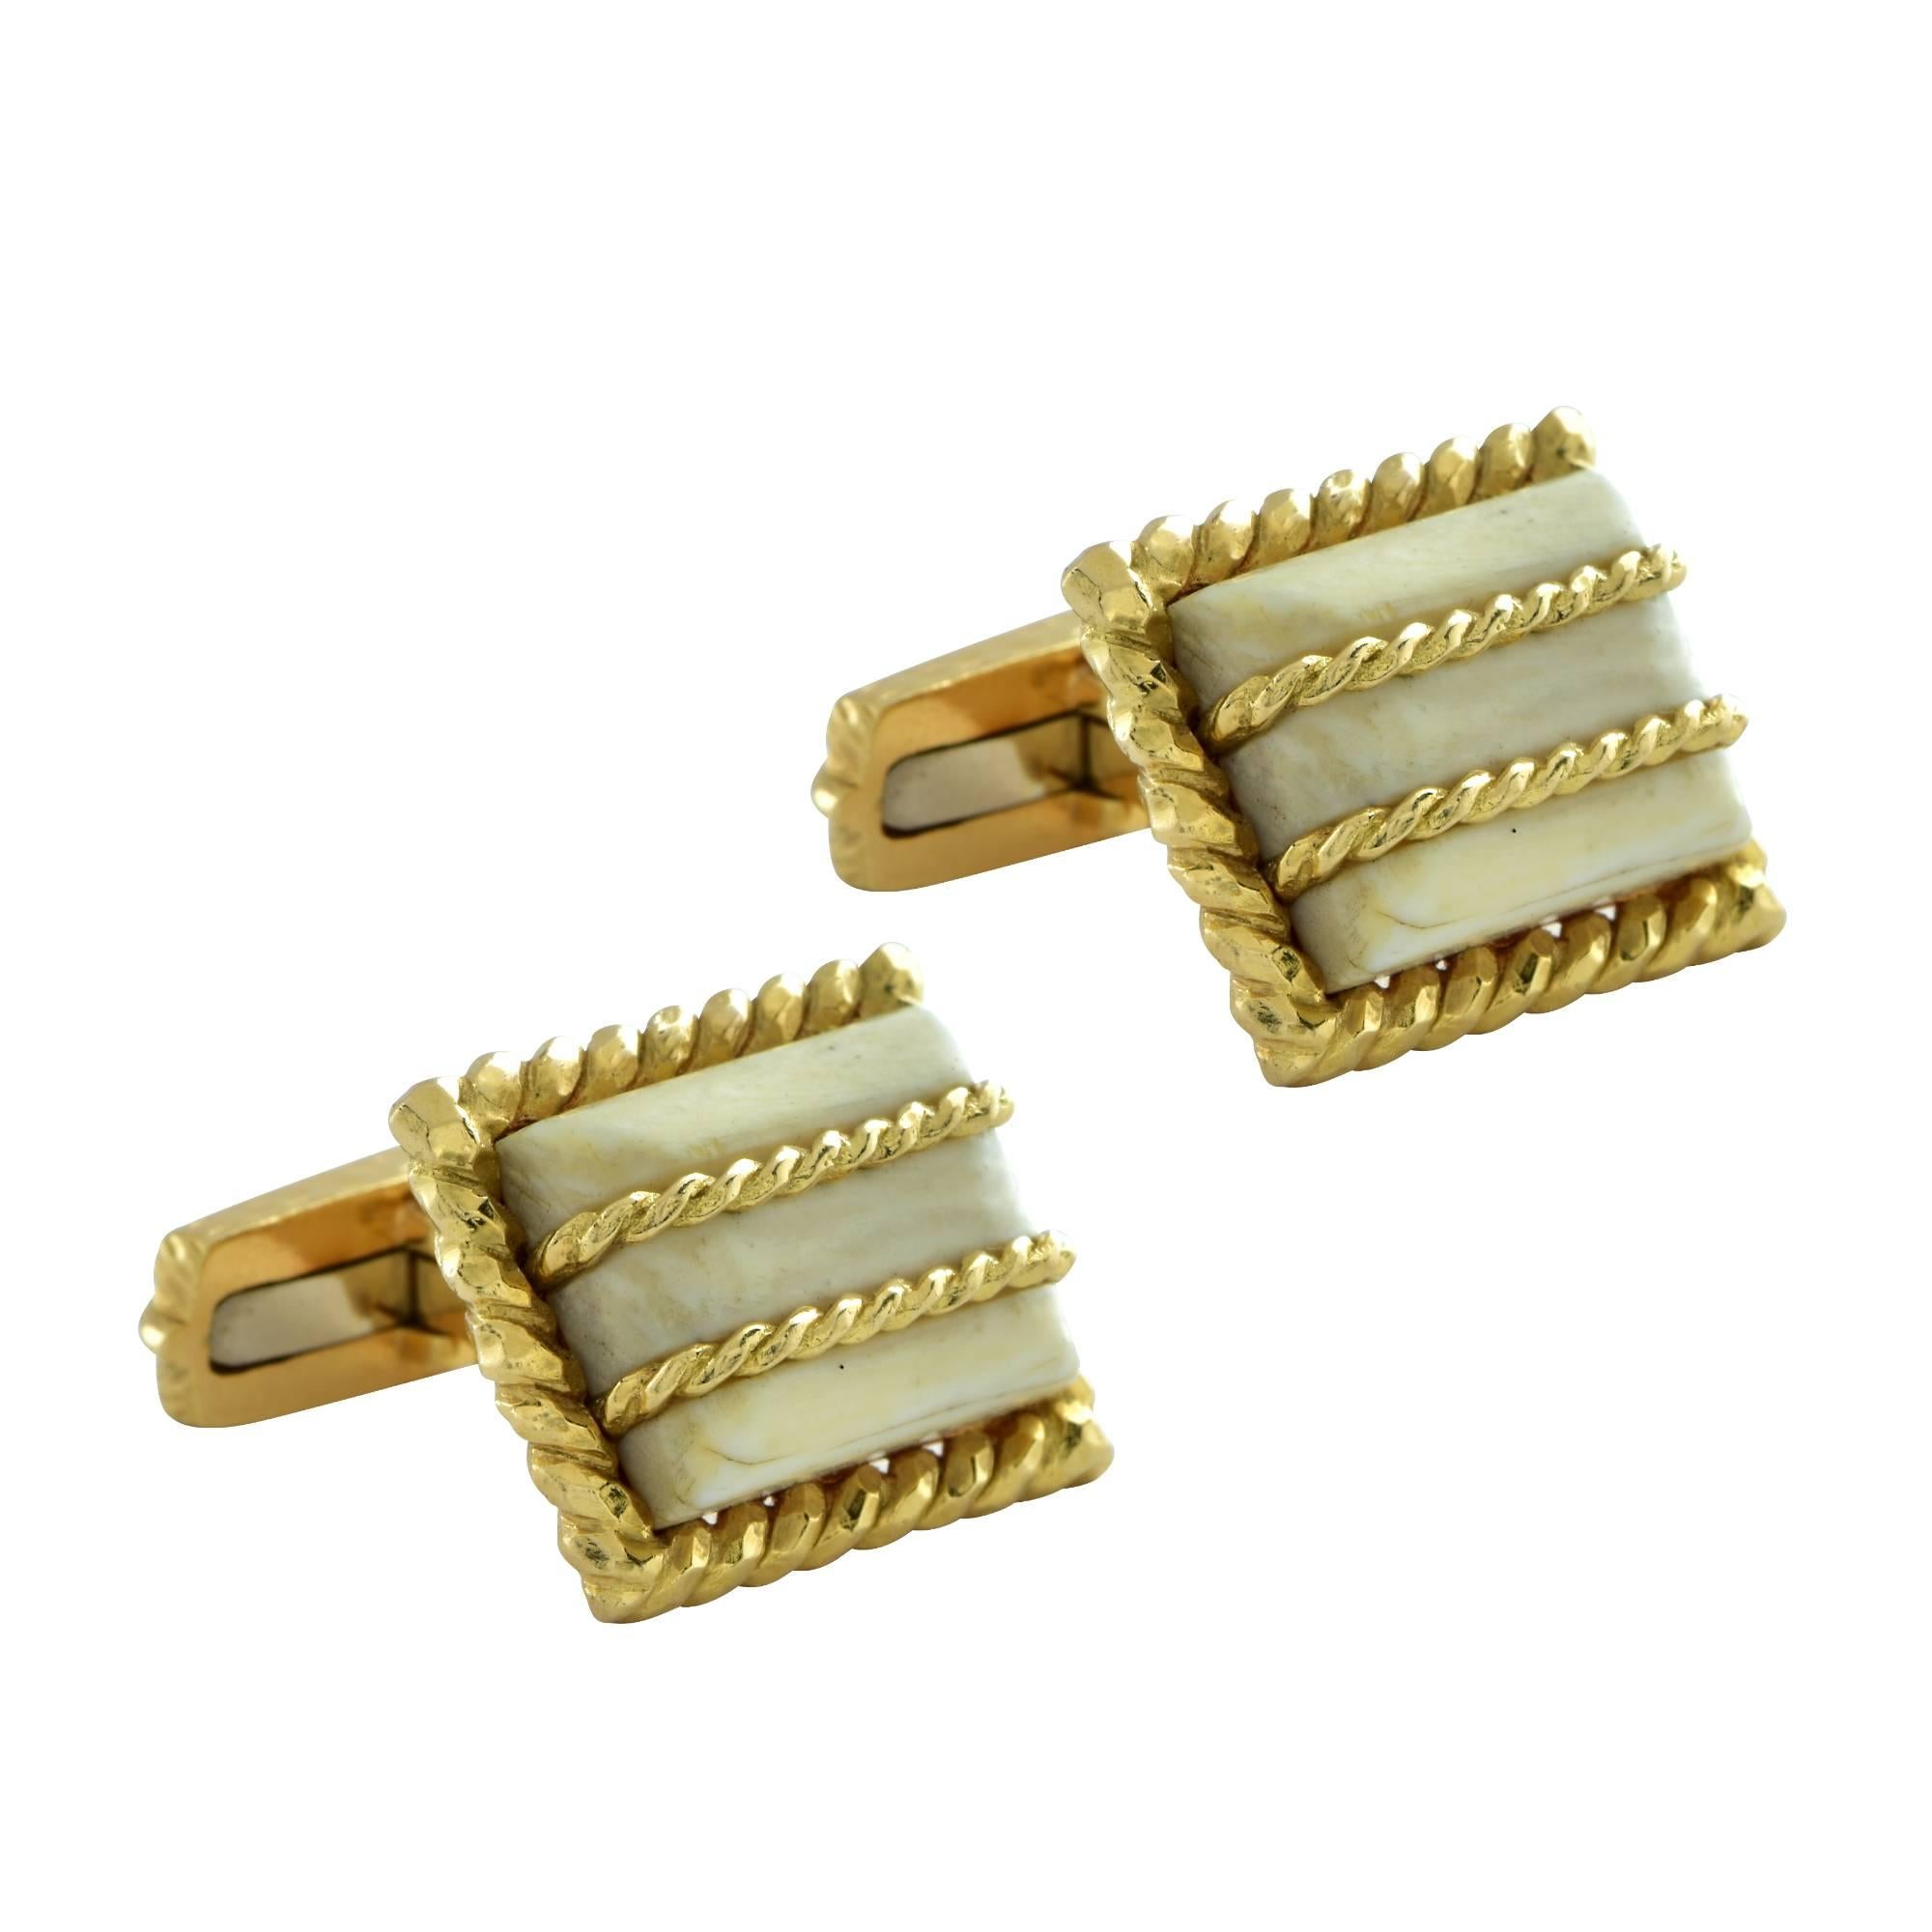 Elegant David Webb 18 Karat Yellow Gold and bone cufflinks. These cufflinks feature a rectangular faced cabochon crafted from bone, framed in 18 karat yellow gold twisted rope , with twisted 18 karat yellow gold rope detail across the face of the